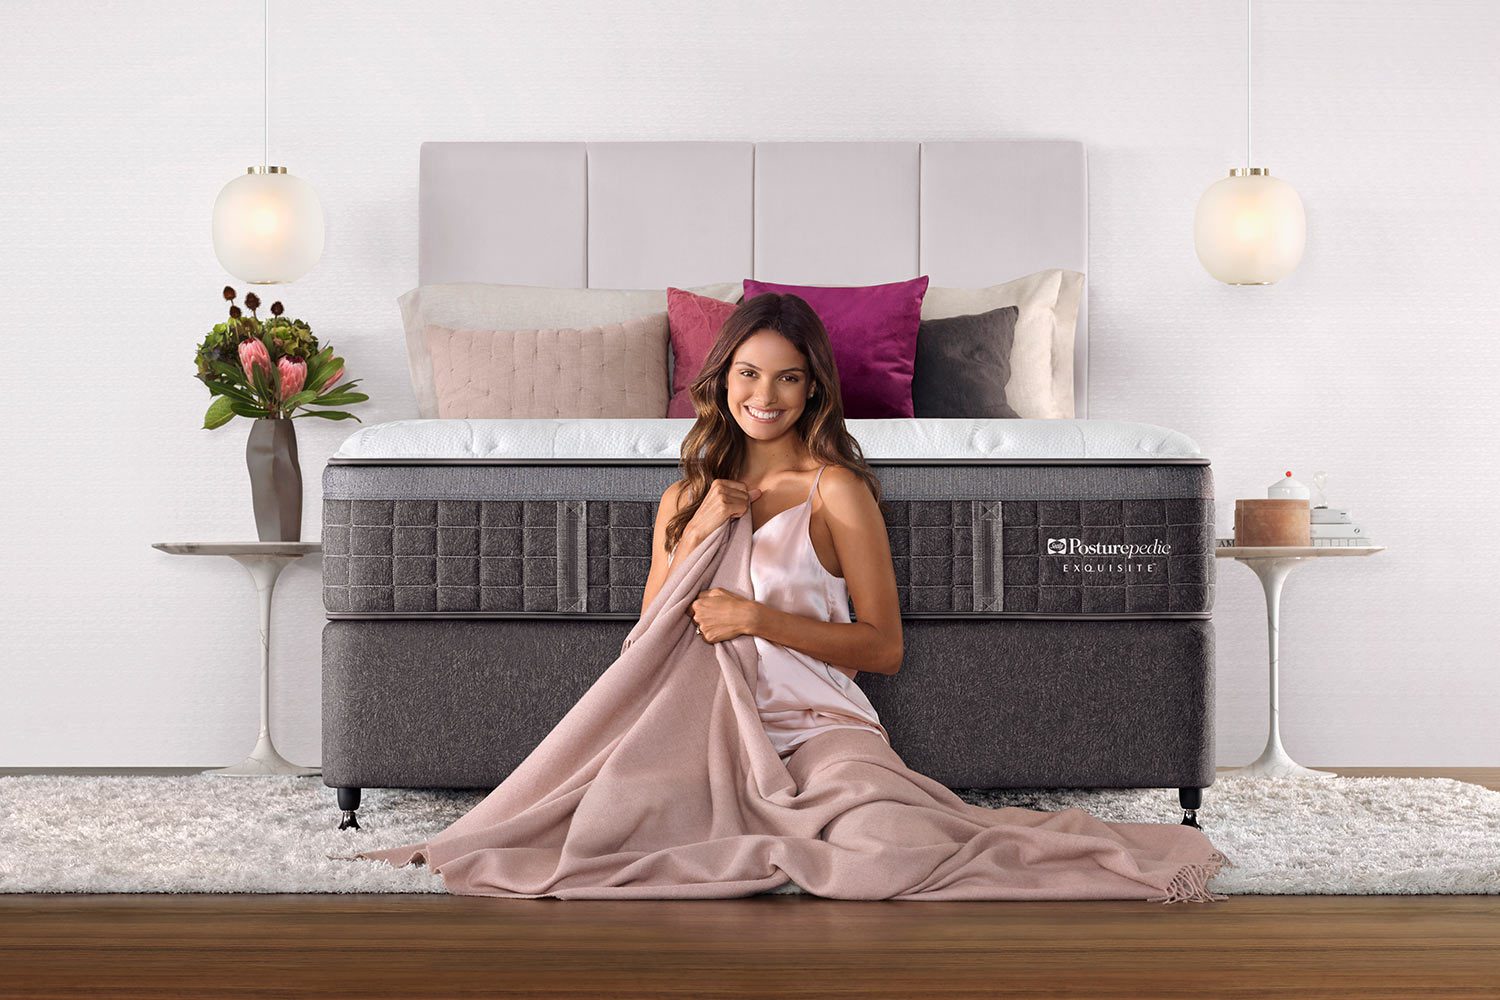 Model sitting in front of Sealy Posturepedic Exquisite mattress